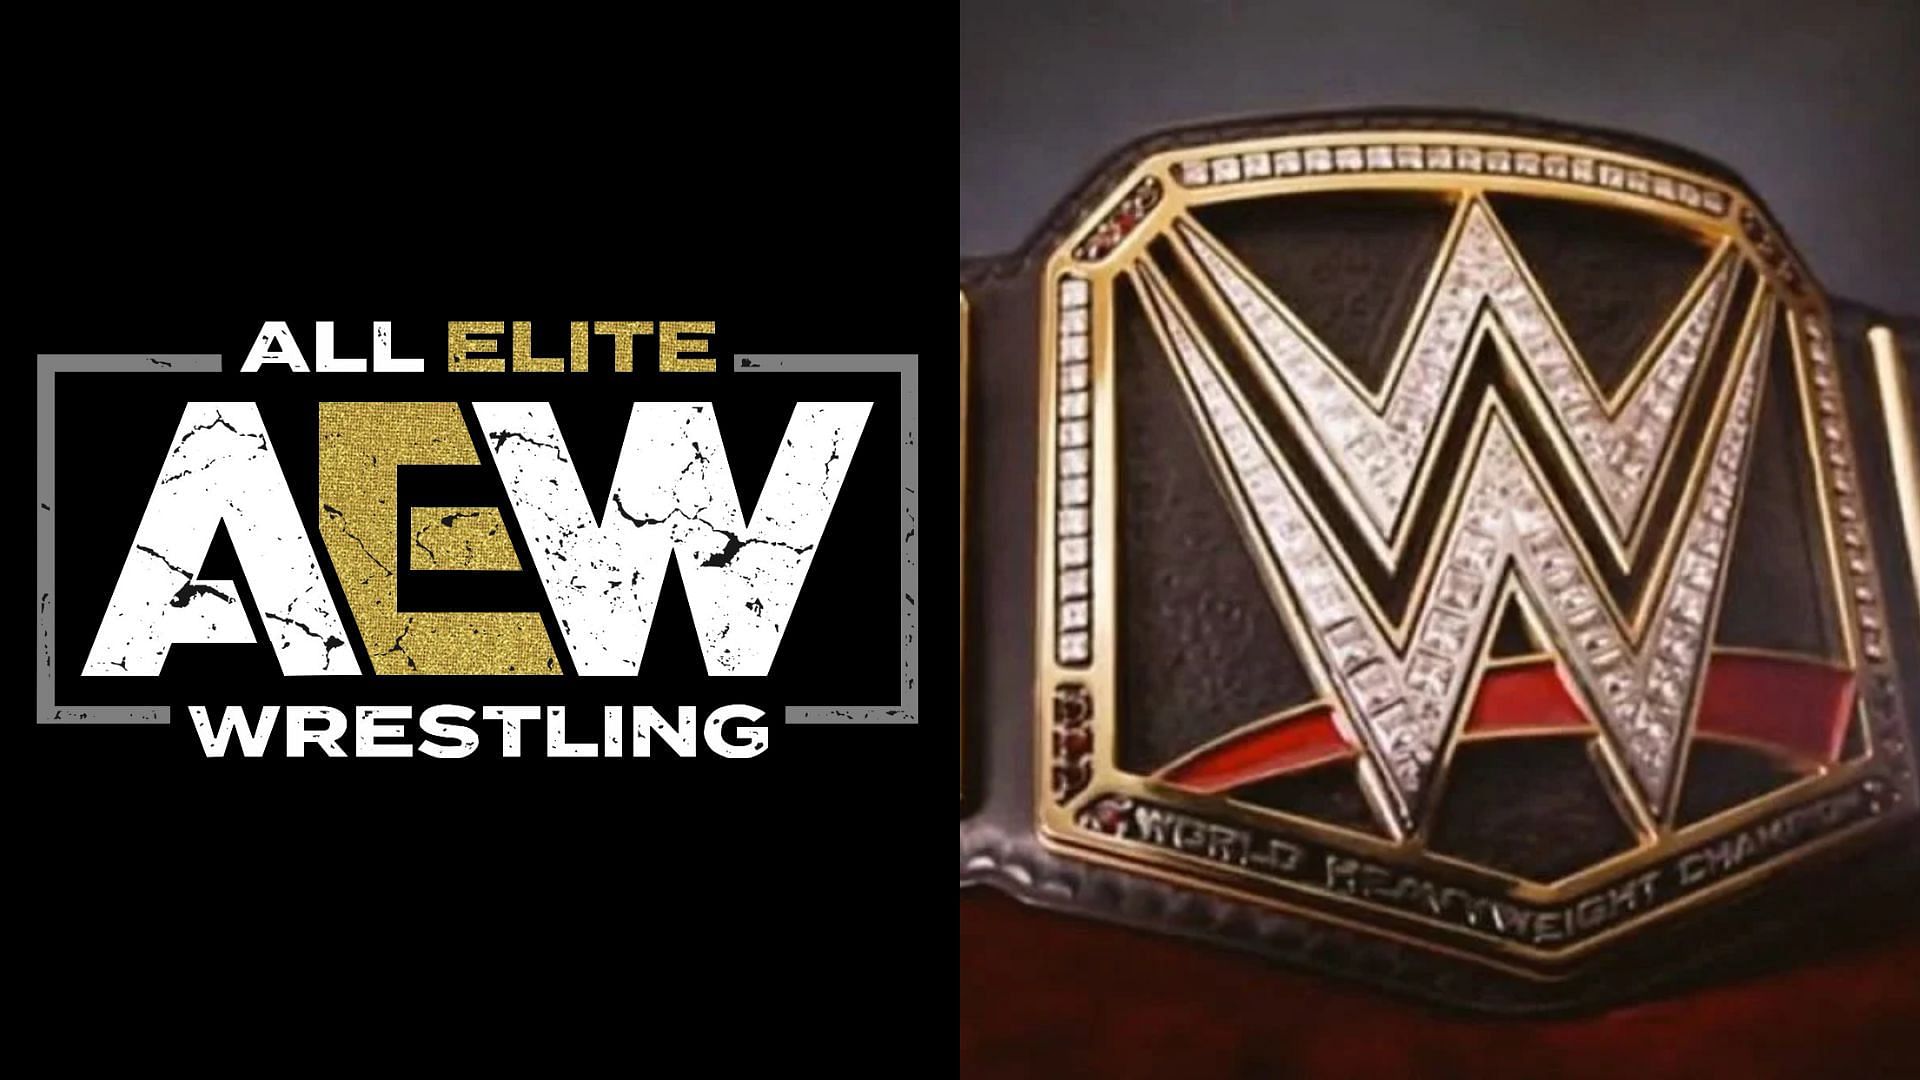 This former WWE Champion has made waves in AEW over the past few months.